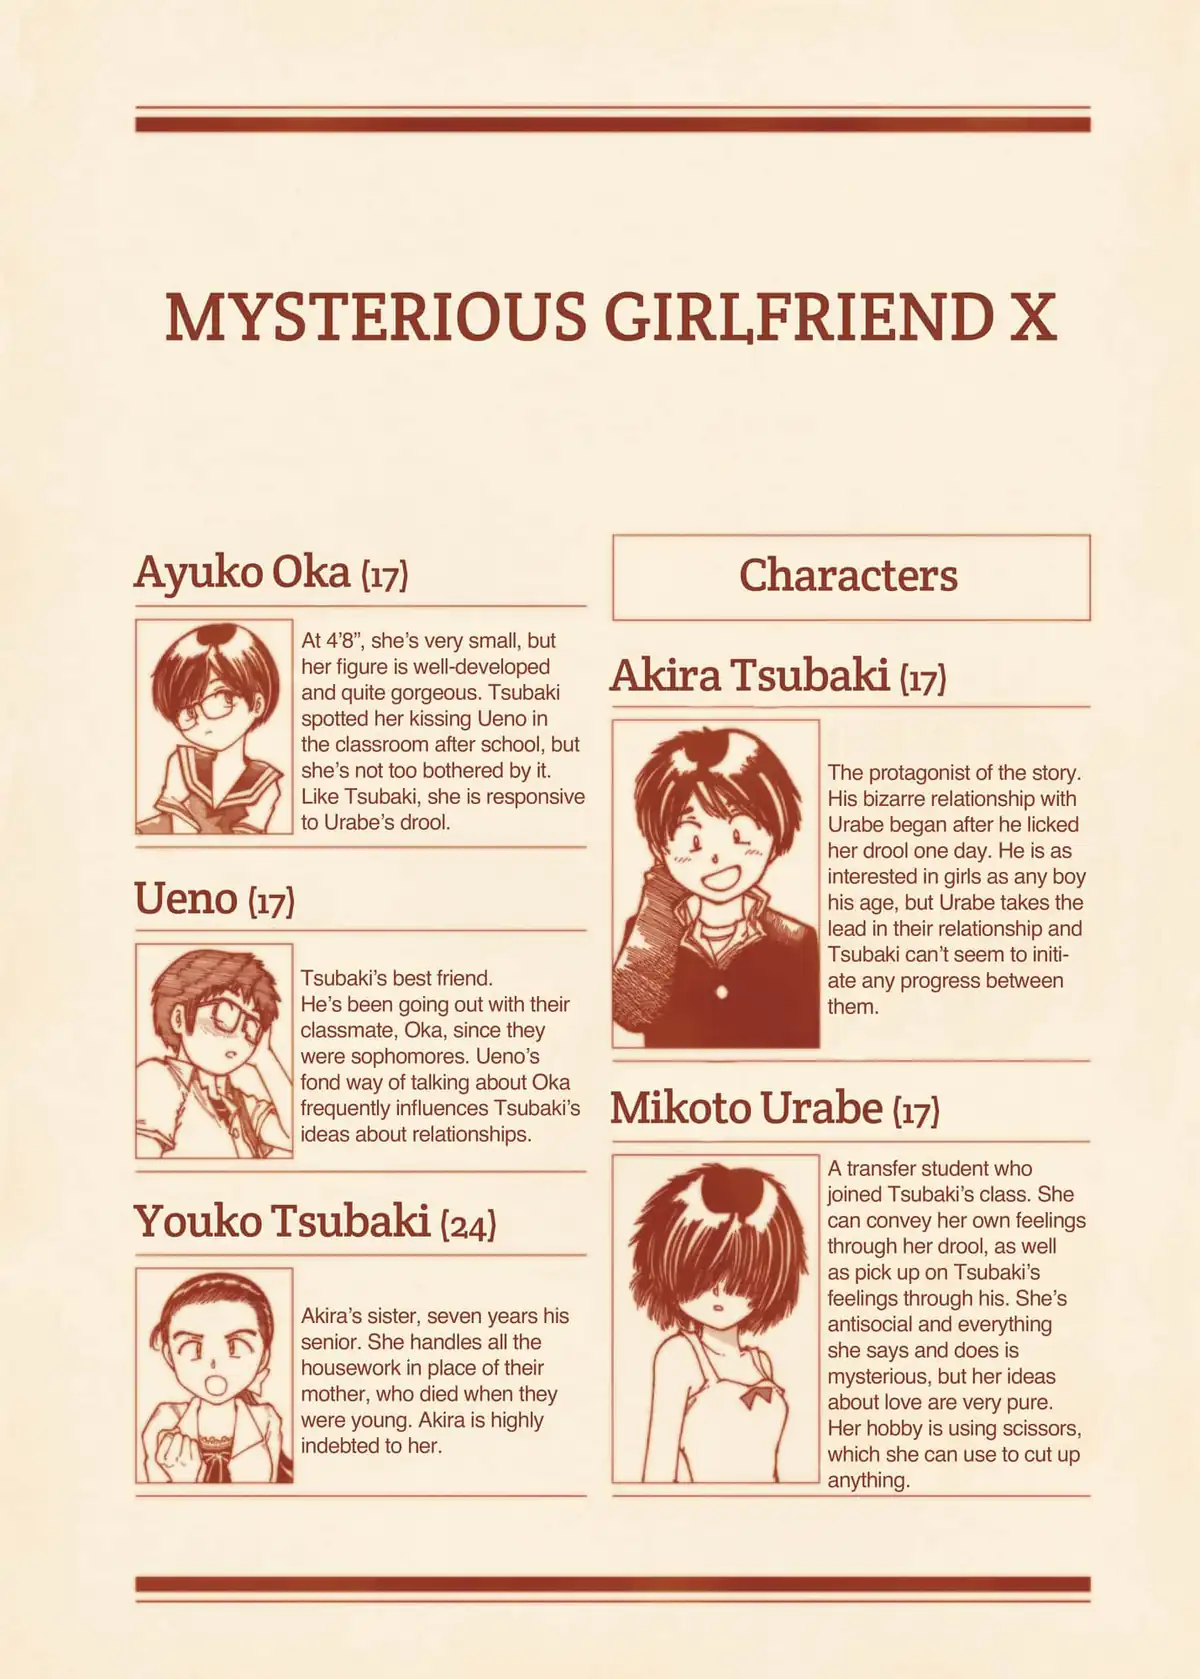 Read Mysterious Girlfriend X Vol.11 Chapter 82 : The Mysterious